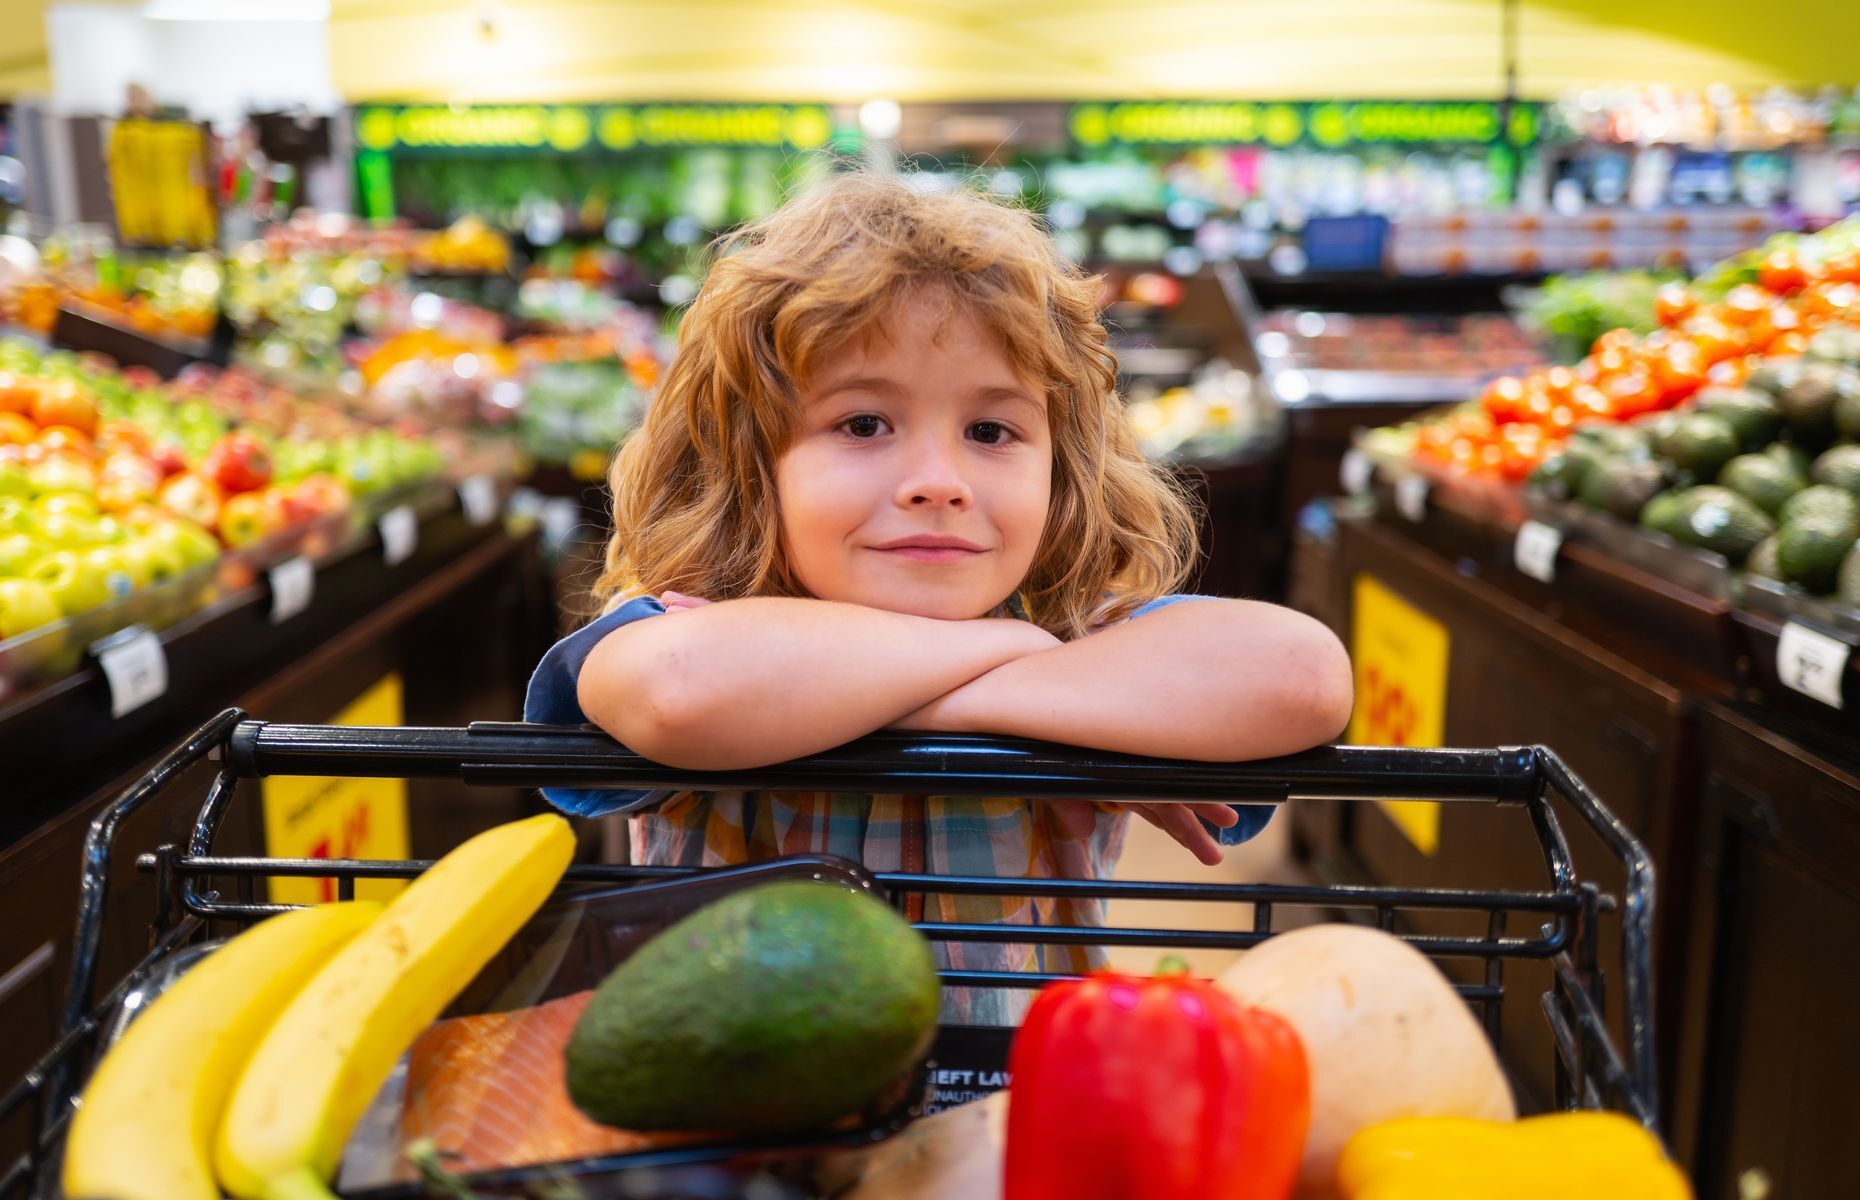 <p>One other thing you can do around this age is to show your kiddos <a href="https://www.moneymanagement.org/blog/comparison-shopping" title="https://www.moneymanagement.org/blog/comparison-shopping">how to comparison-shop</a>. Read through a store’s price labels with your child, compare the quality of items, talk about bulk item pricing, discuss buying brand-name versus generic. Walking through the differences of each will give them a good idea of how to fill their needs while saving for what they want. </p>